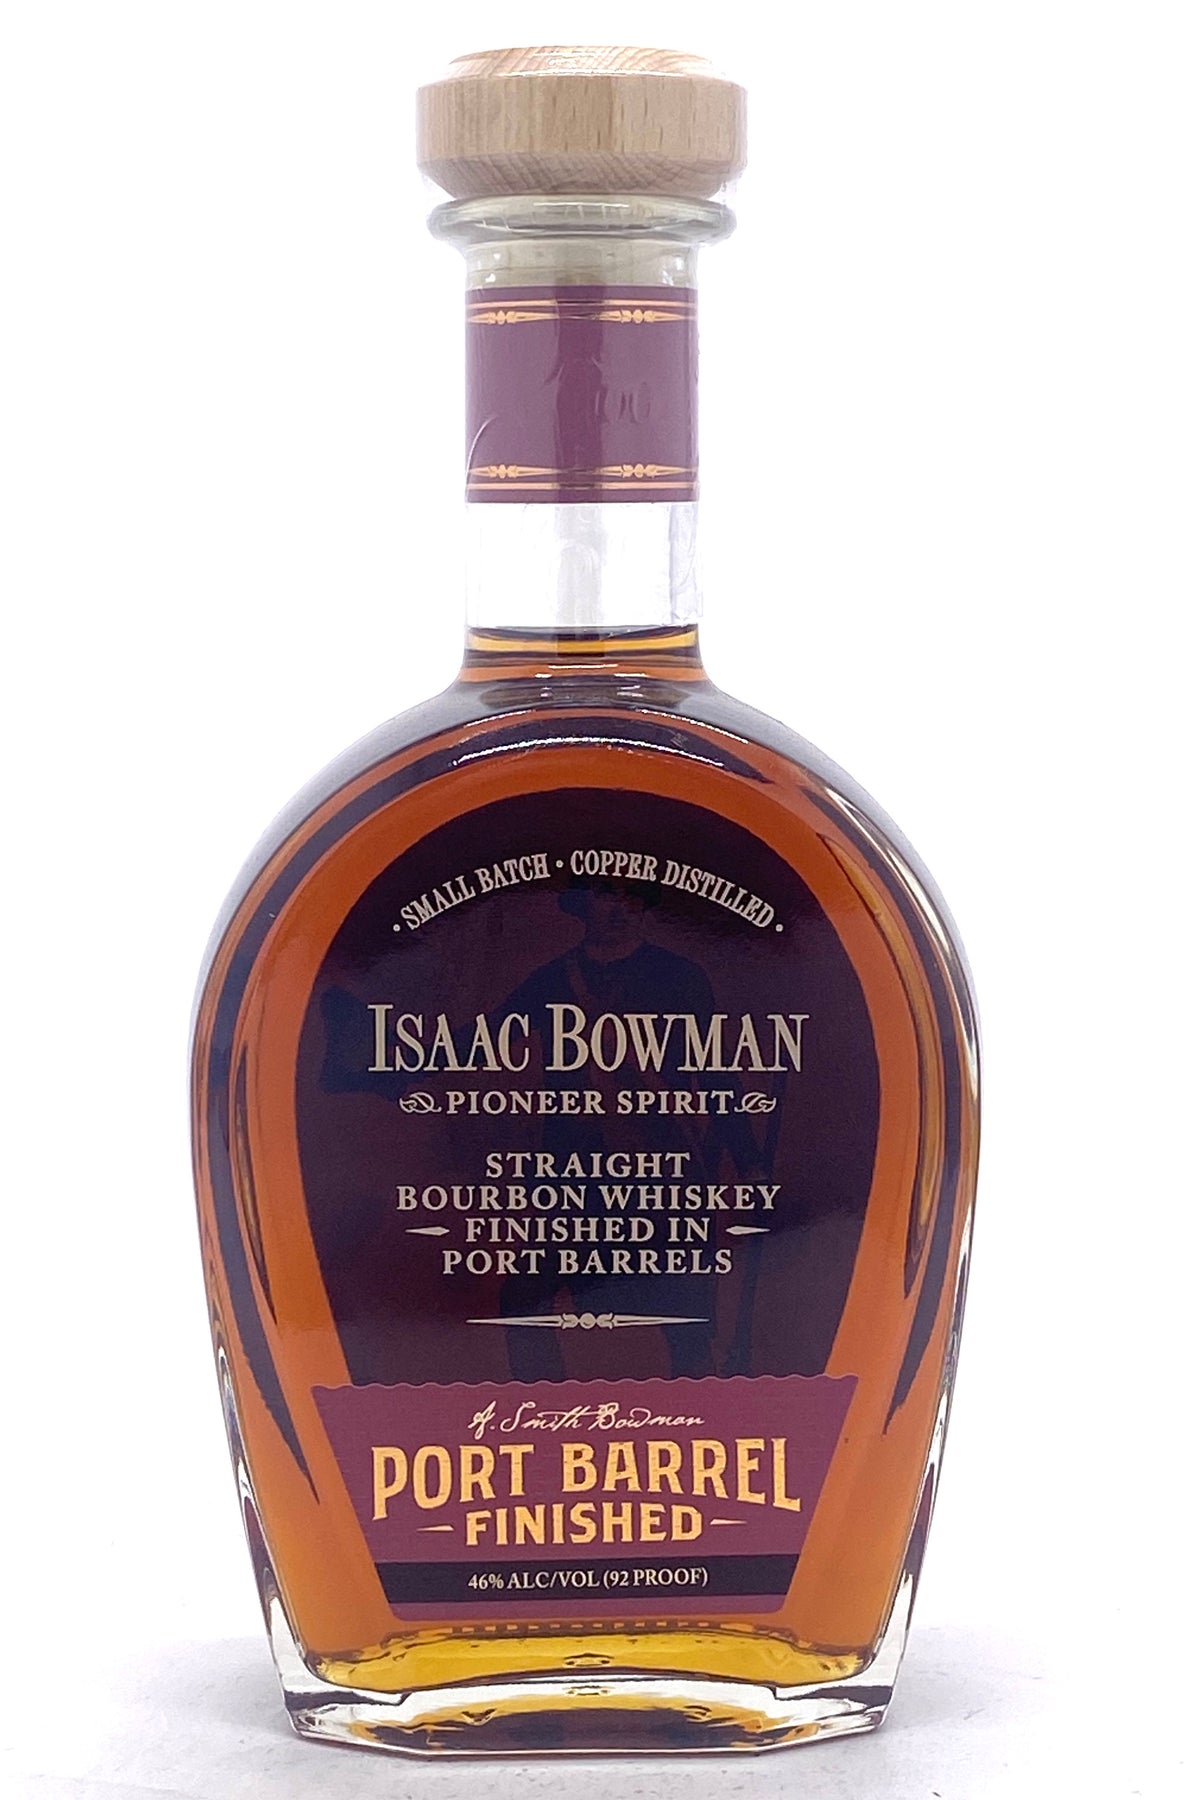 Isaac Bowman Pioneer Spirit Straight Bourbon Whiskey Finished in Port Barrels